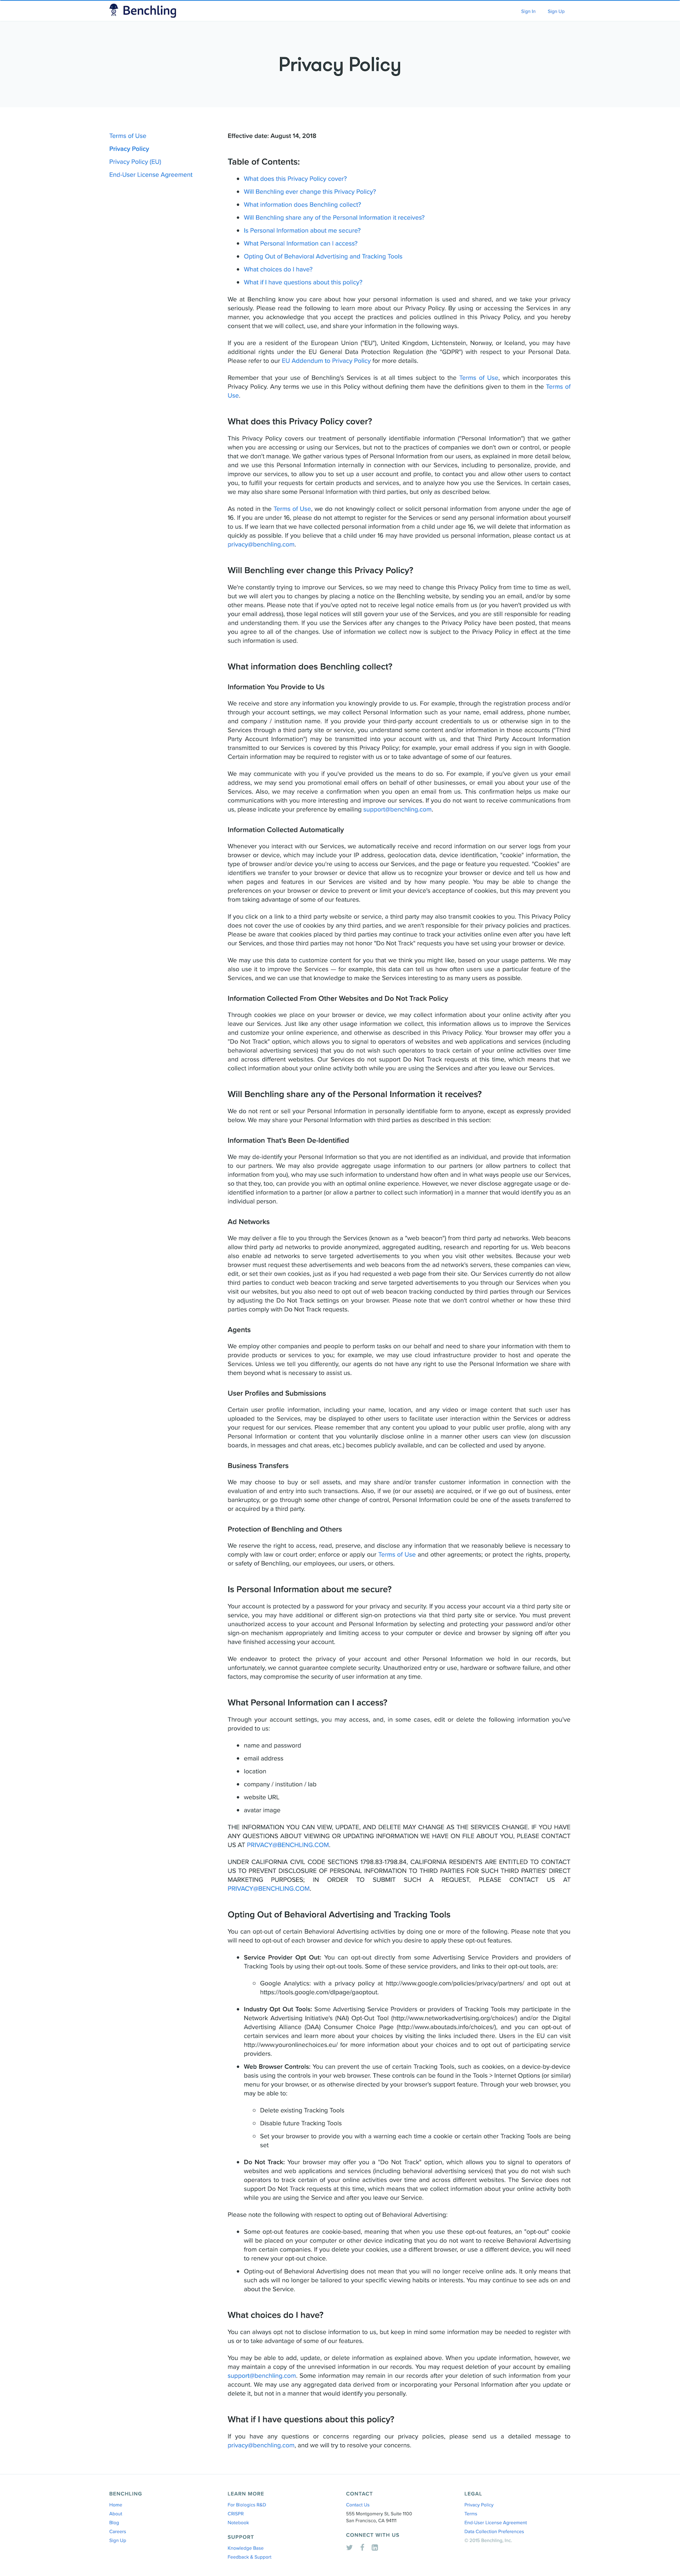 Screenshot of the Privacy Policy page from the Benchling website.